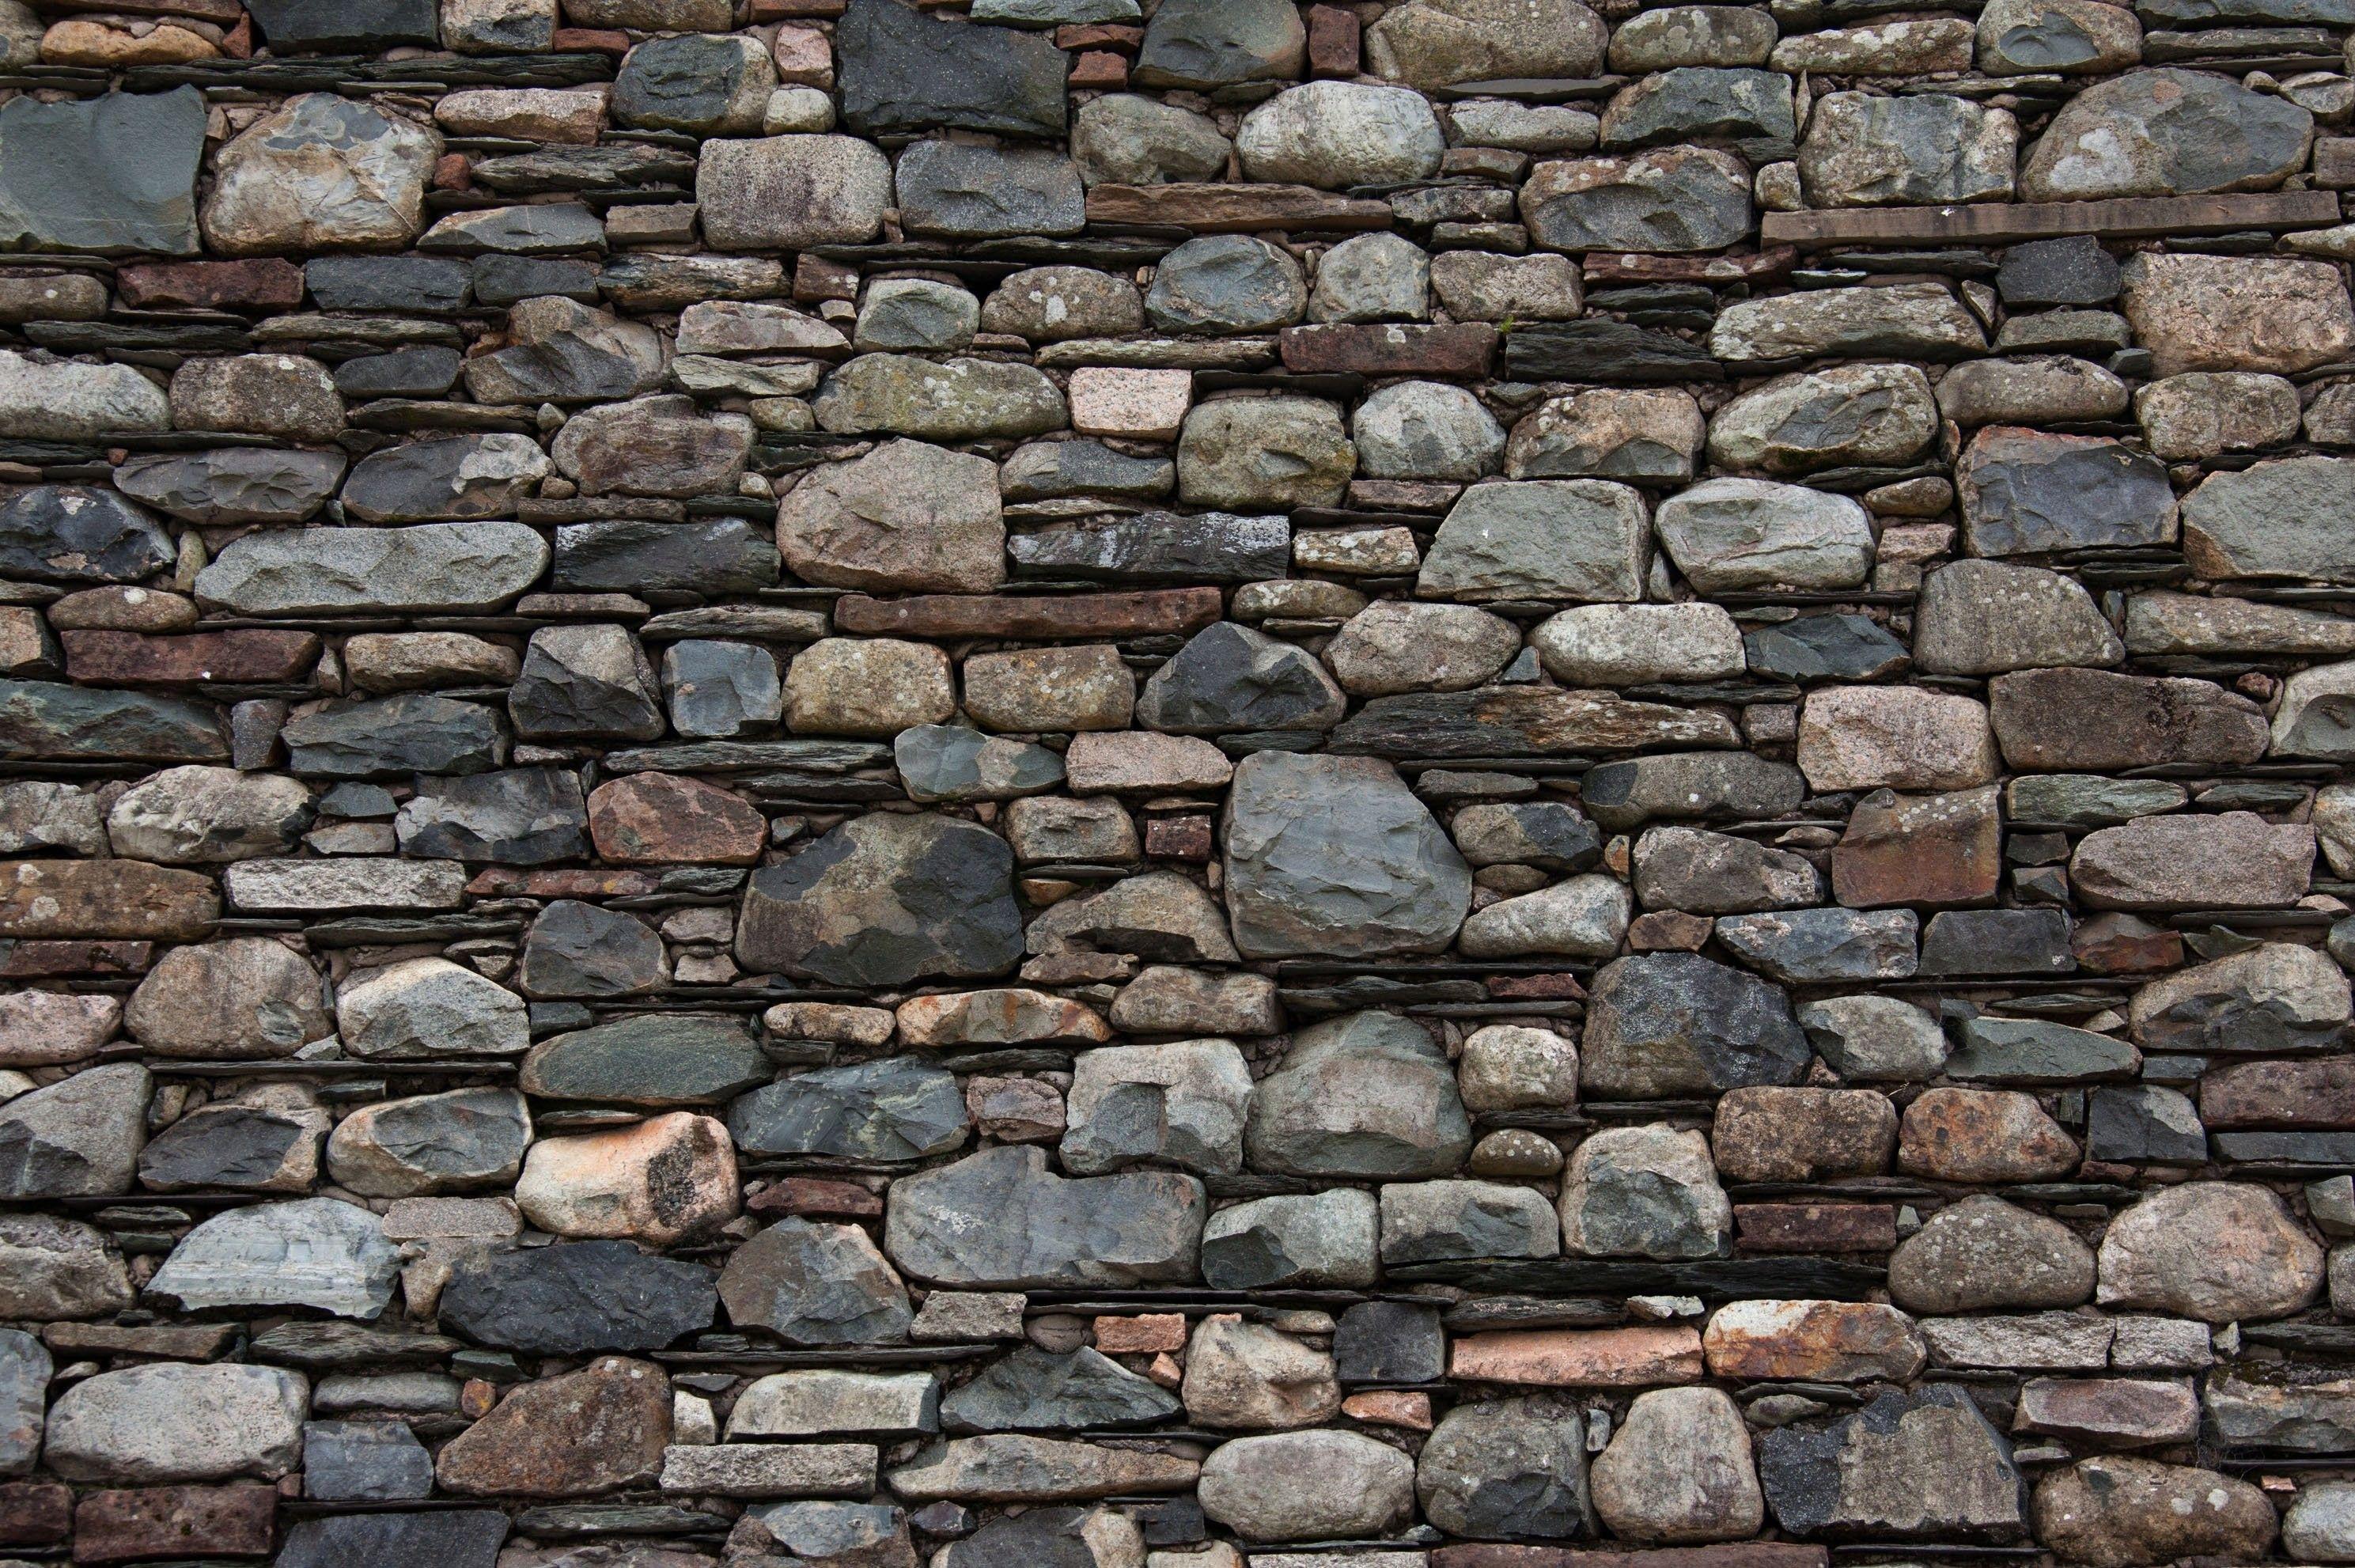 Stone Wall Wallpapers Top Free Stone Wall Backgrounds Wallpaperaccess Stone wallpaper heart wallpaper galaxy wallpaper flower wallpaper camera wallpaper wallpaper quotes painting wallpaper lip wallpaper heart in nature. stone wall wallpapers top free stone